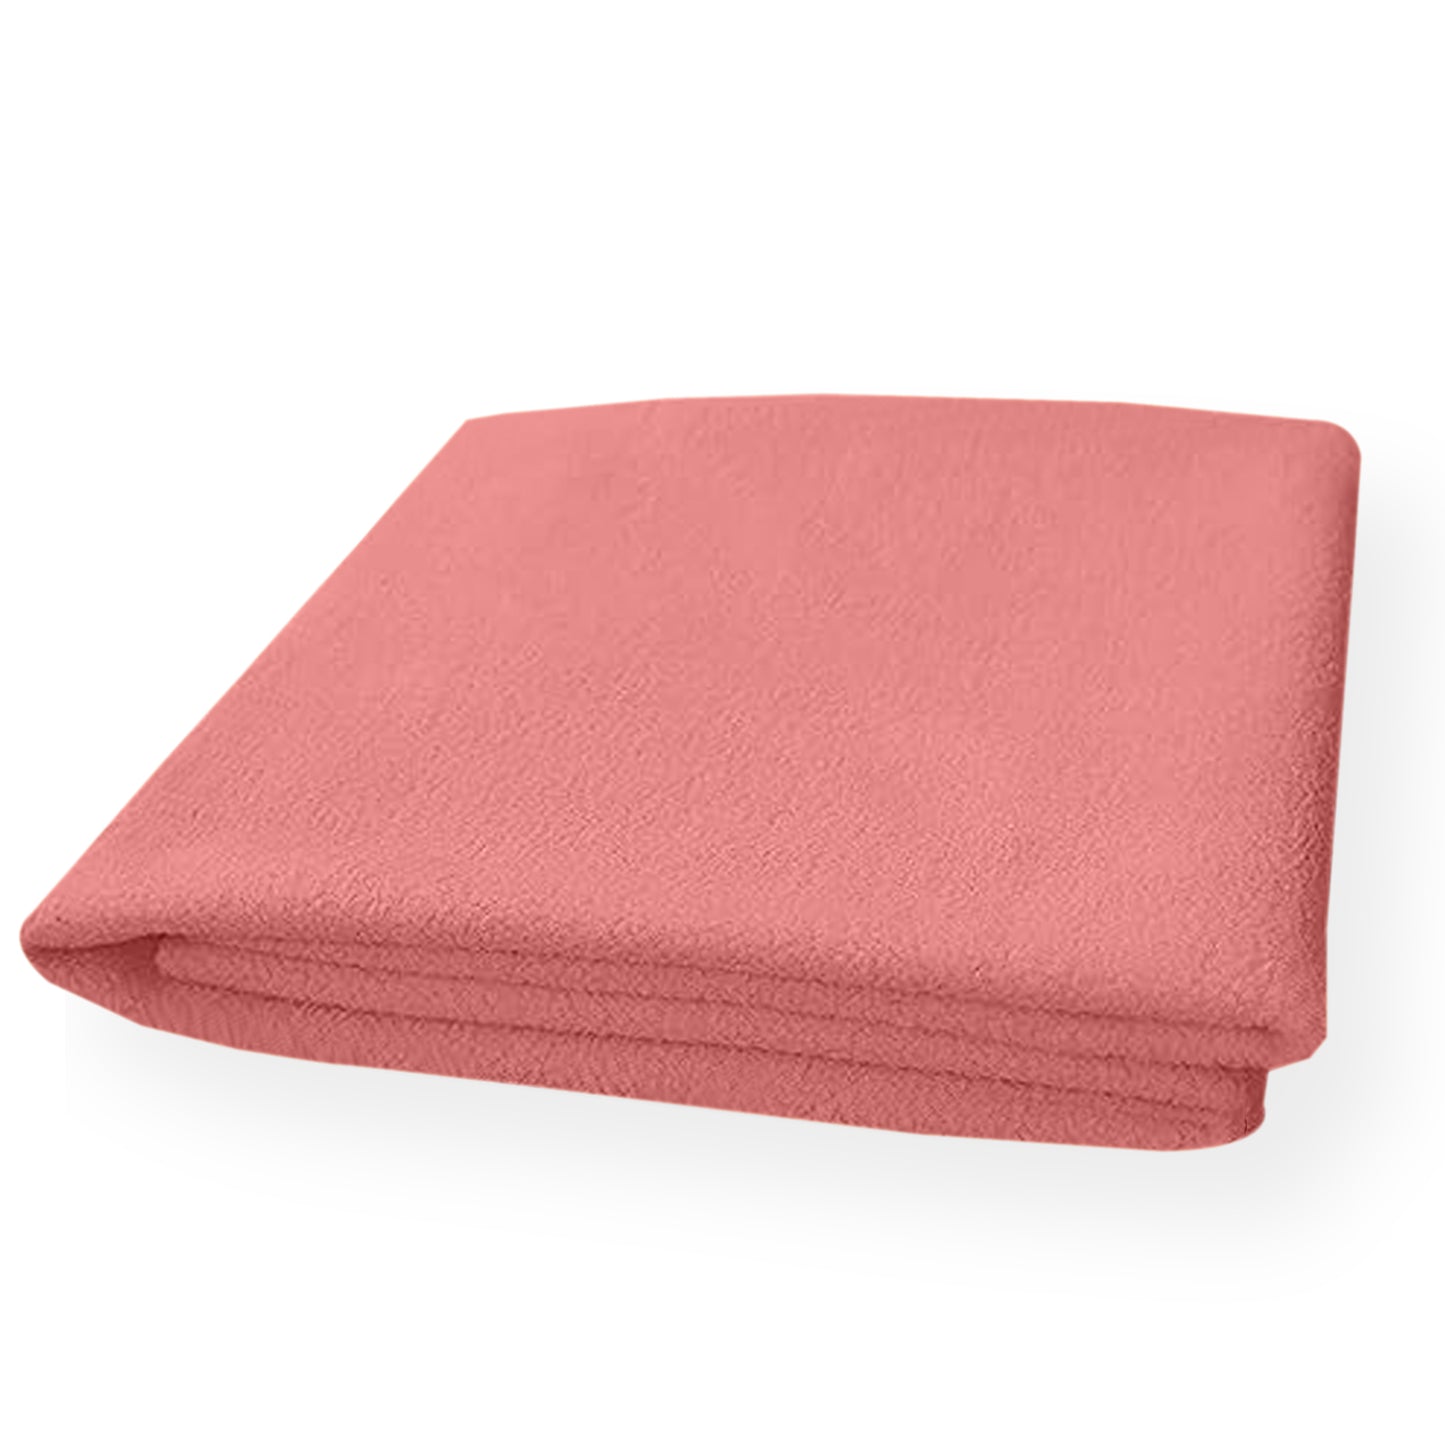 Waterproof Bed Protector, Quick Dry Sheet, Baby Bed Protector (70 X 100 CM), Pack of 1 -SELMON ROSE